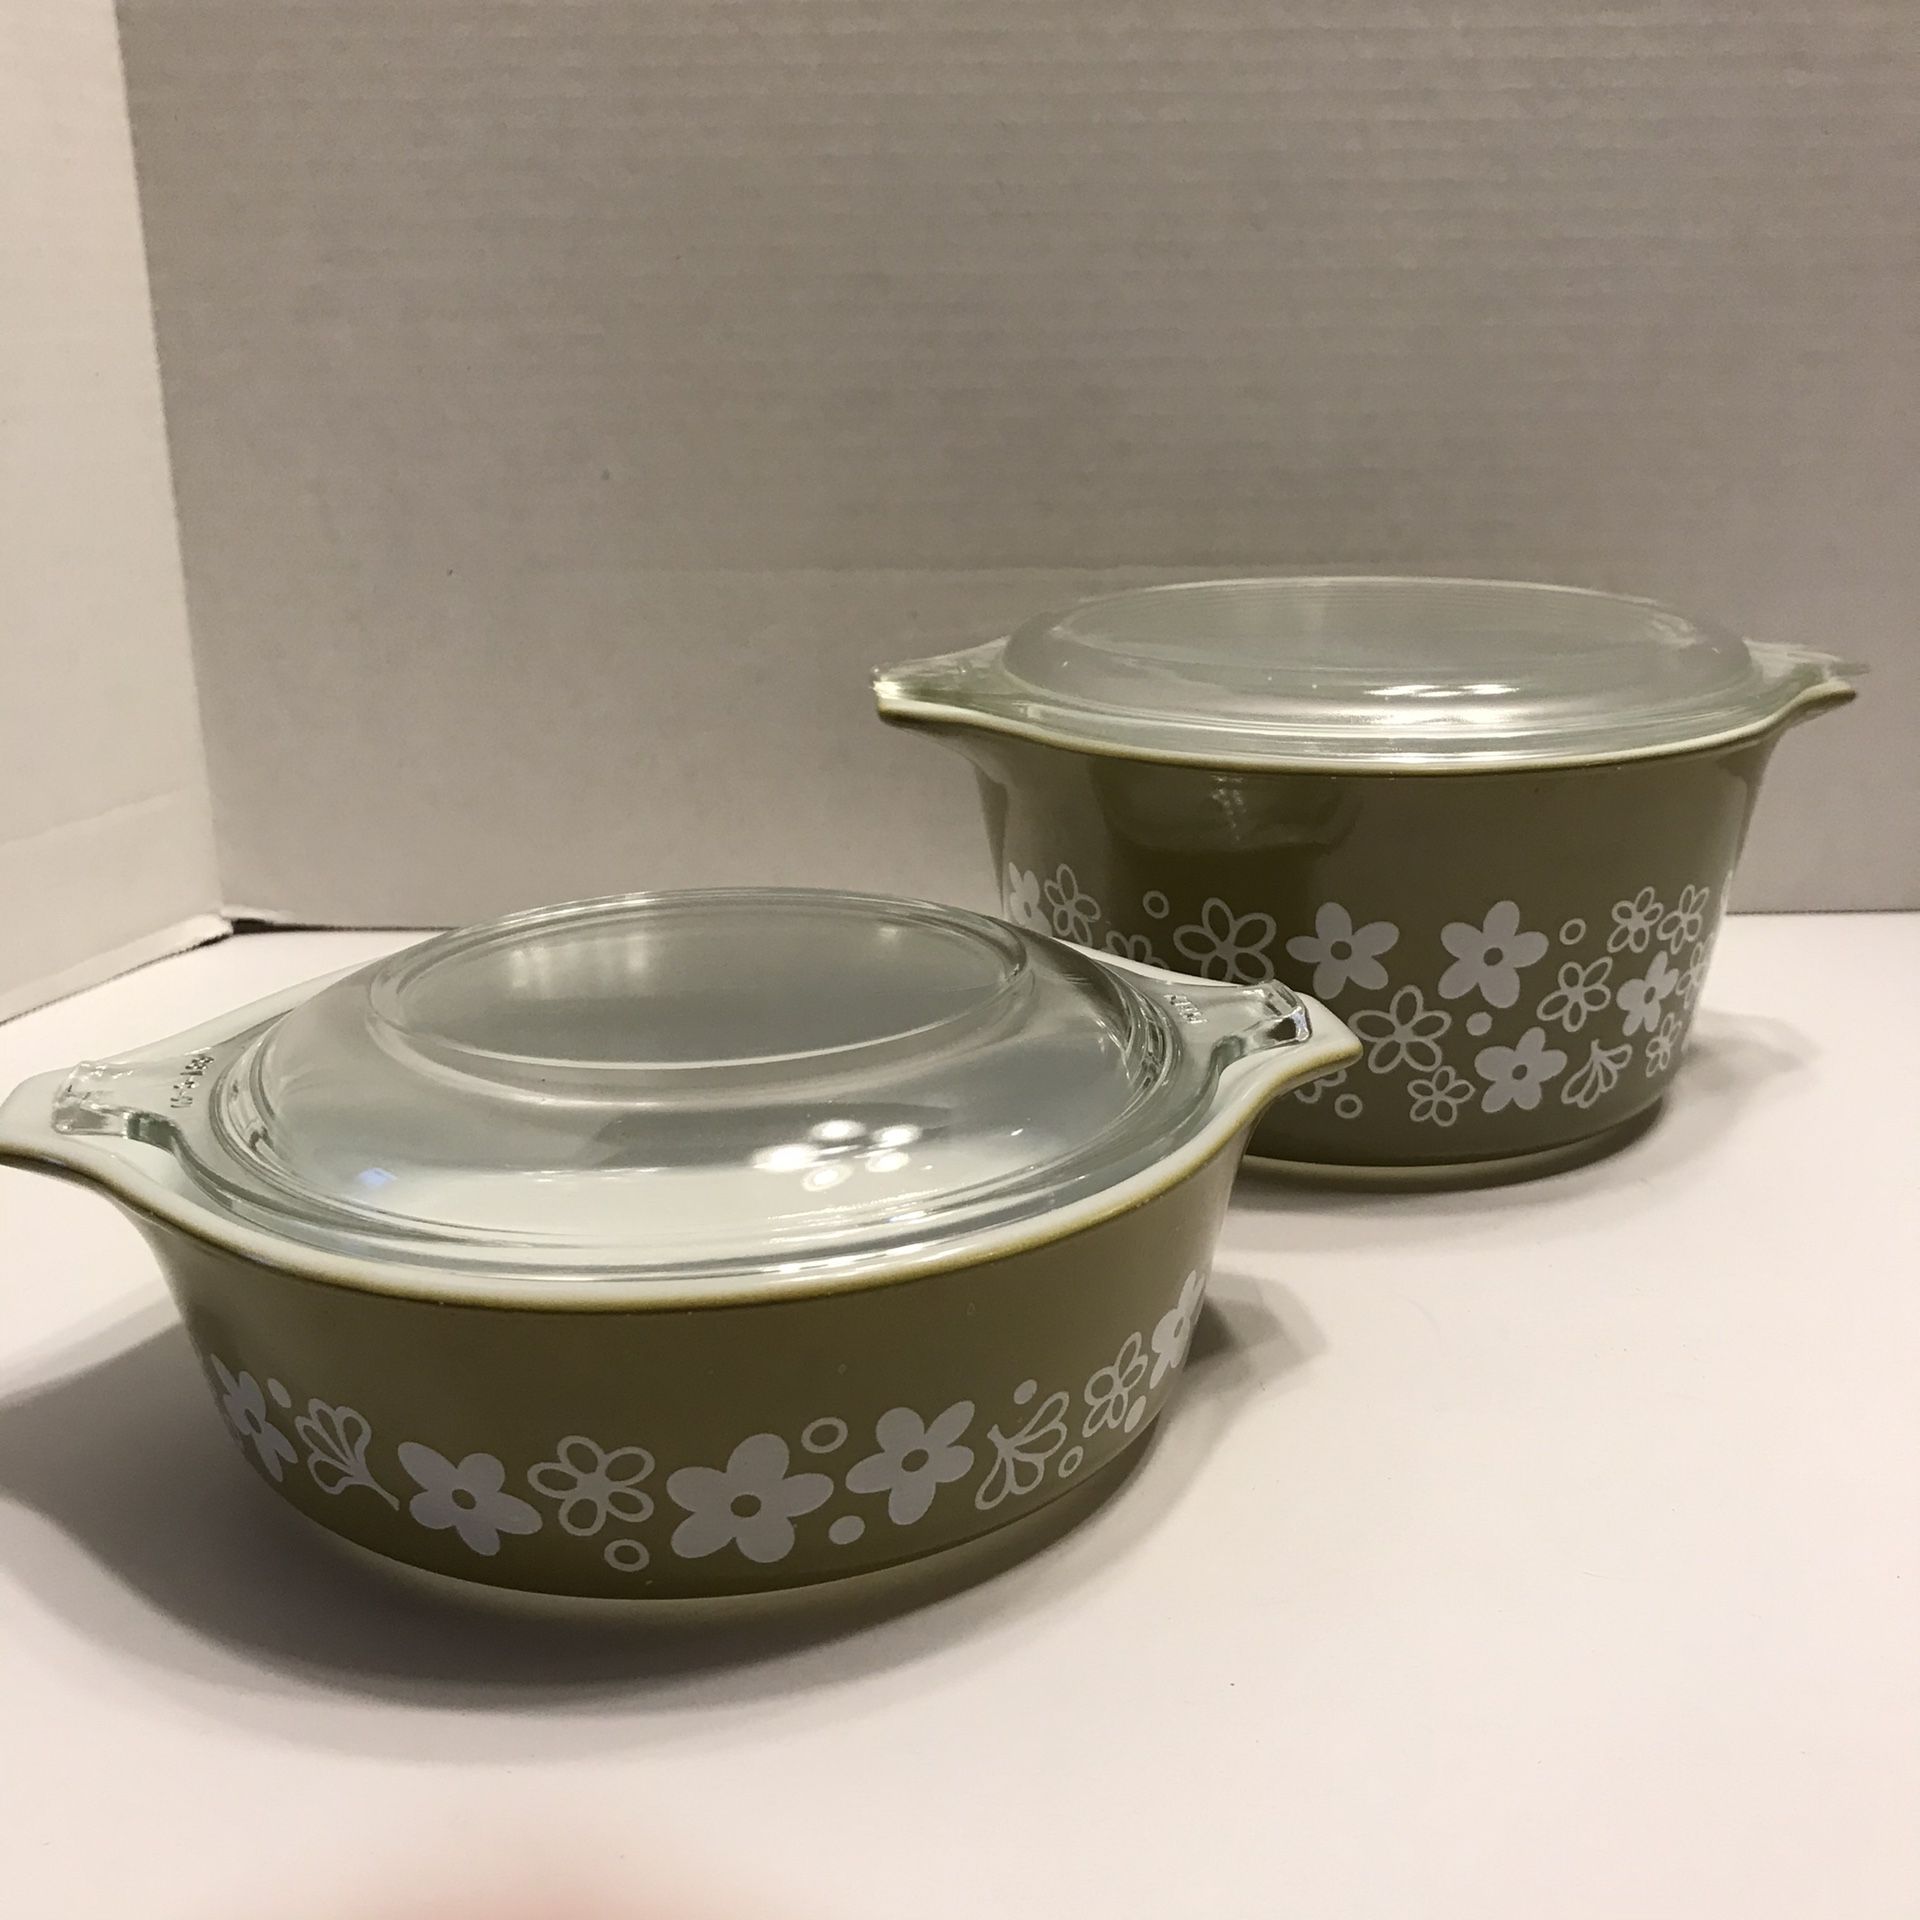 Pyrex Spring Blossom Crazy Daisy Baking Dishes with Lids